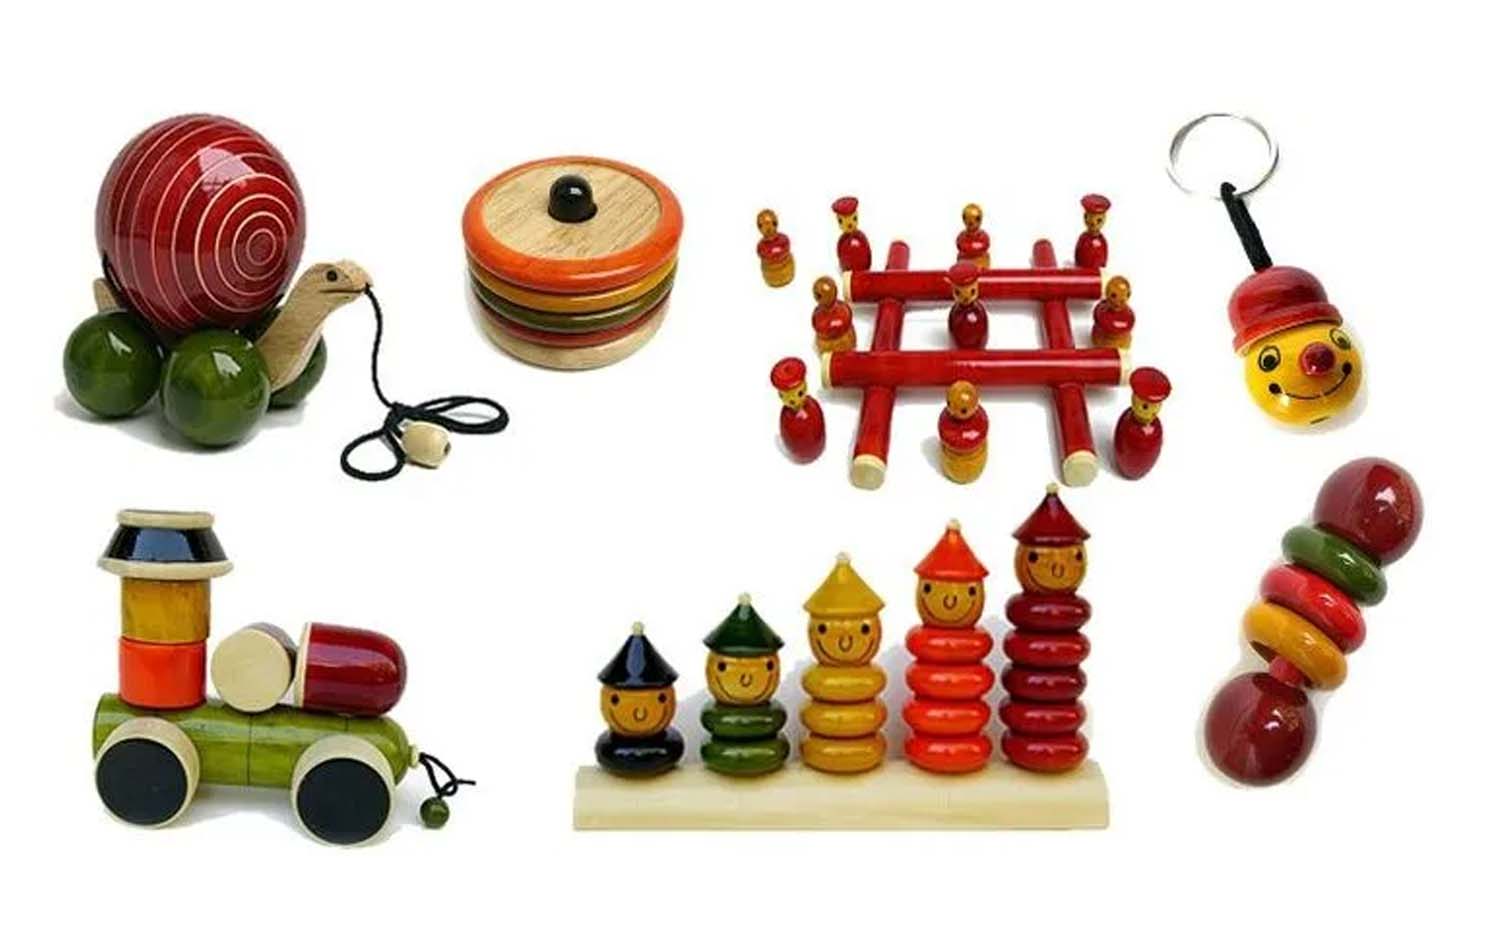 Manufacturers of Wooden Toys in India